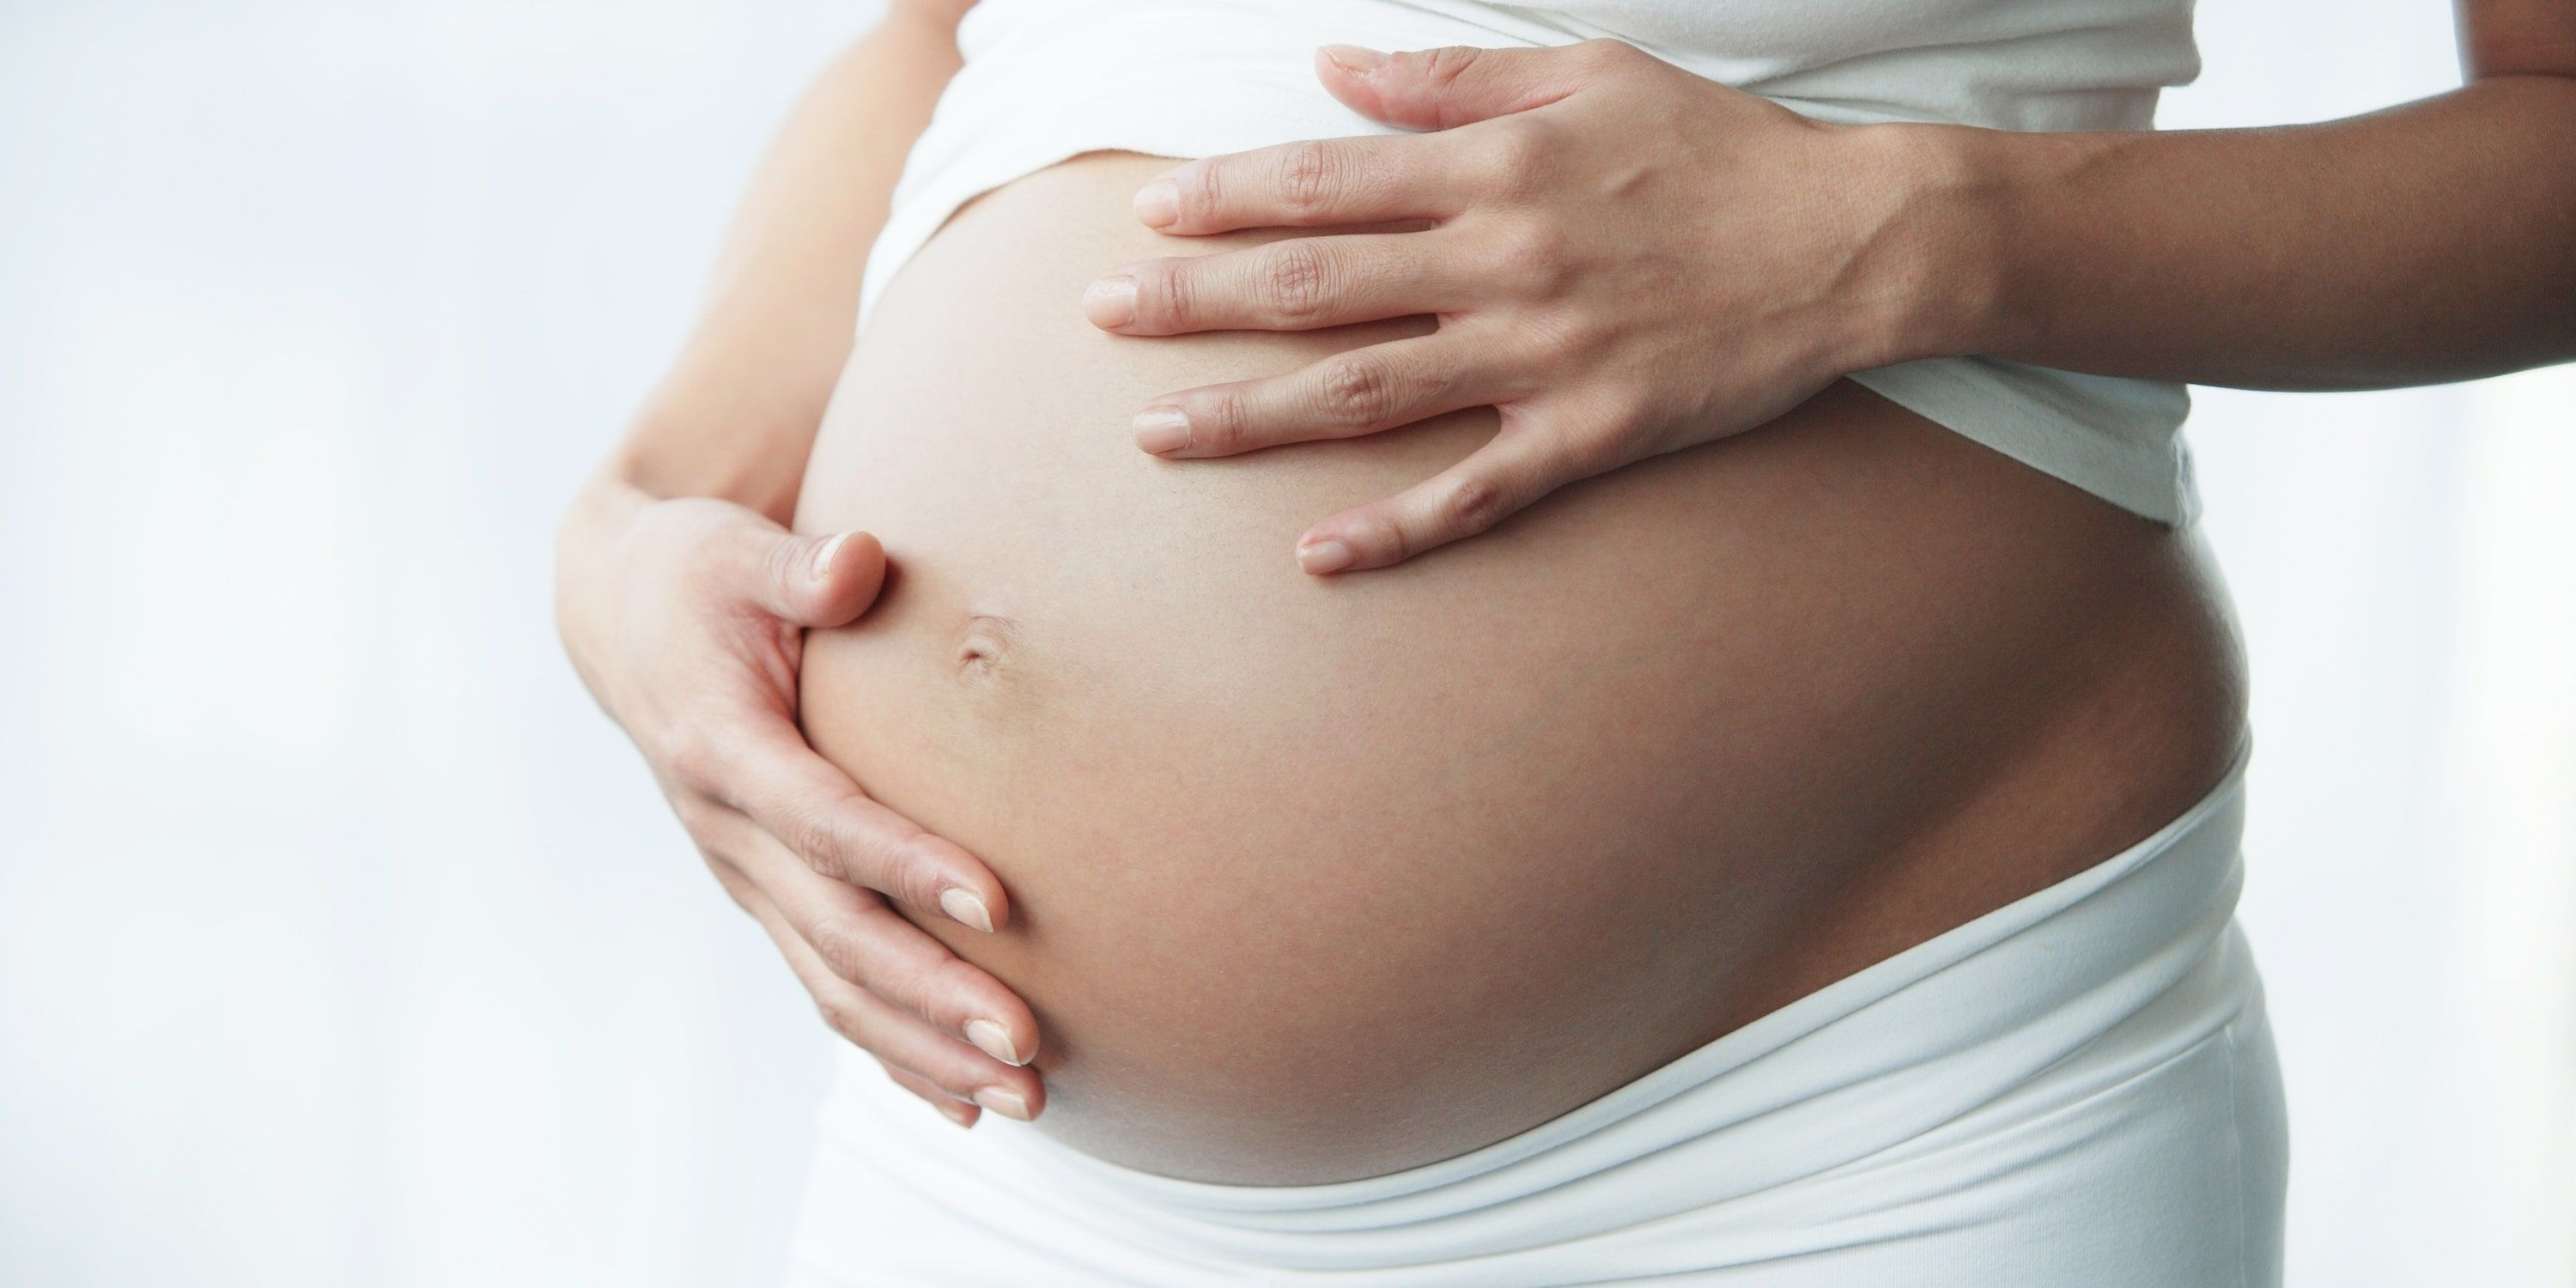 Common Pregnancy Skin Issues and Their Solutions